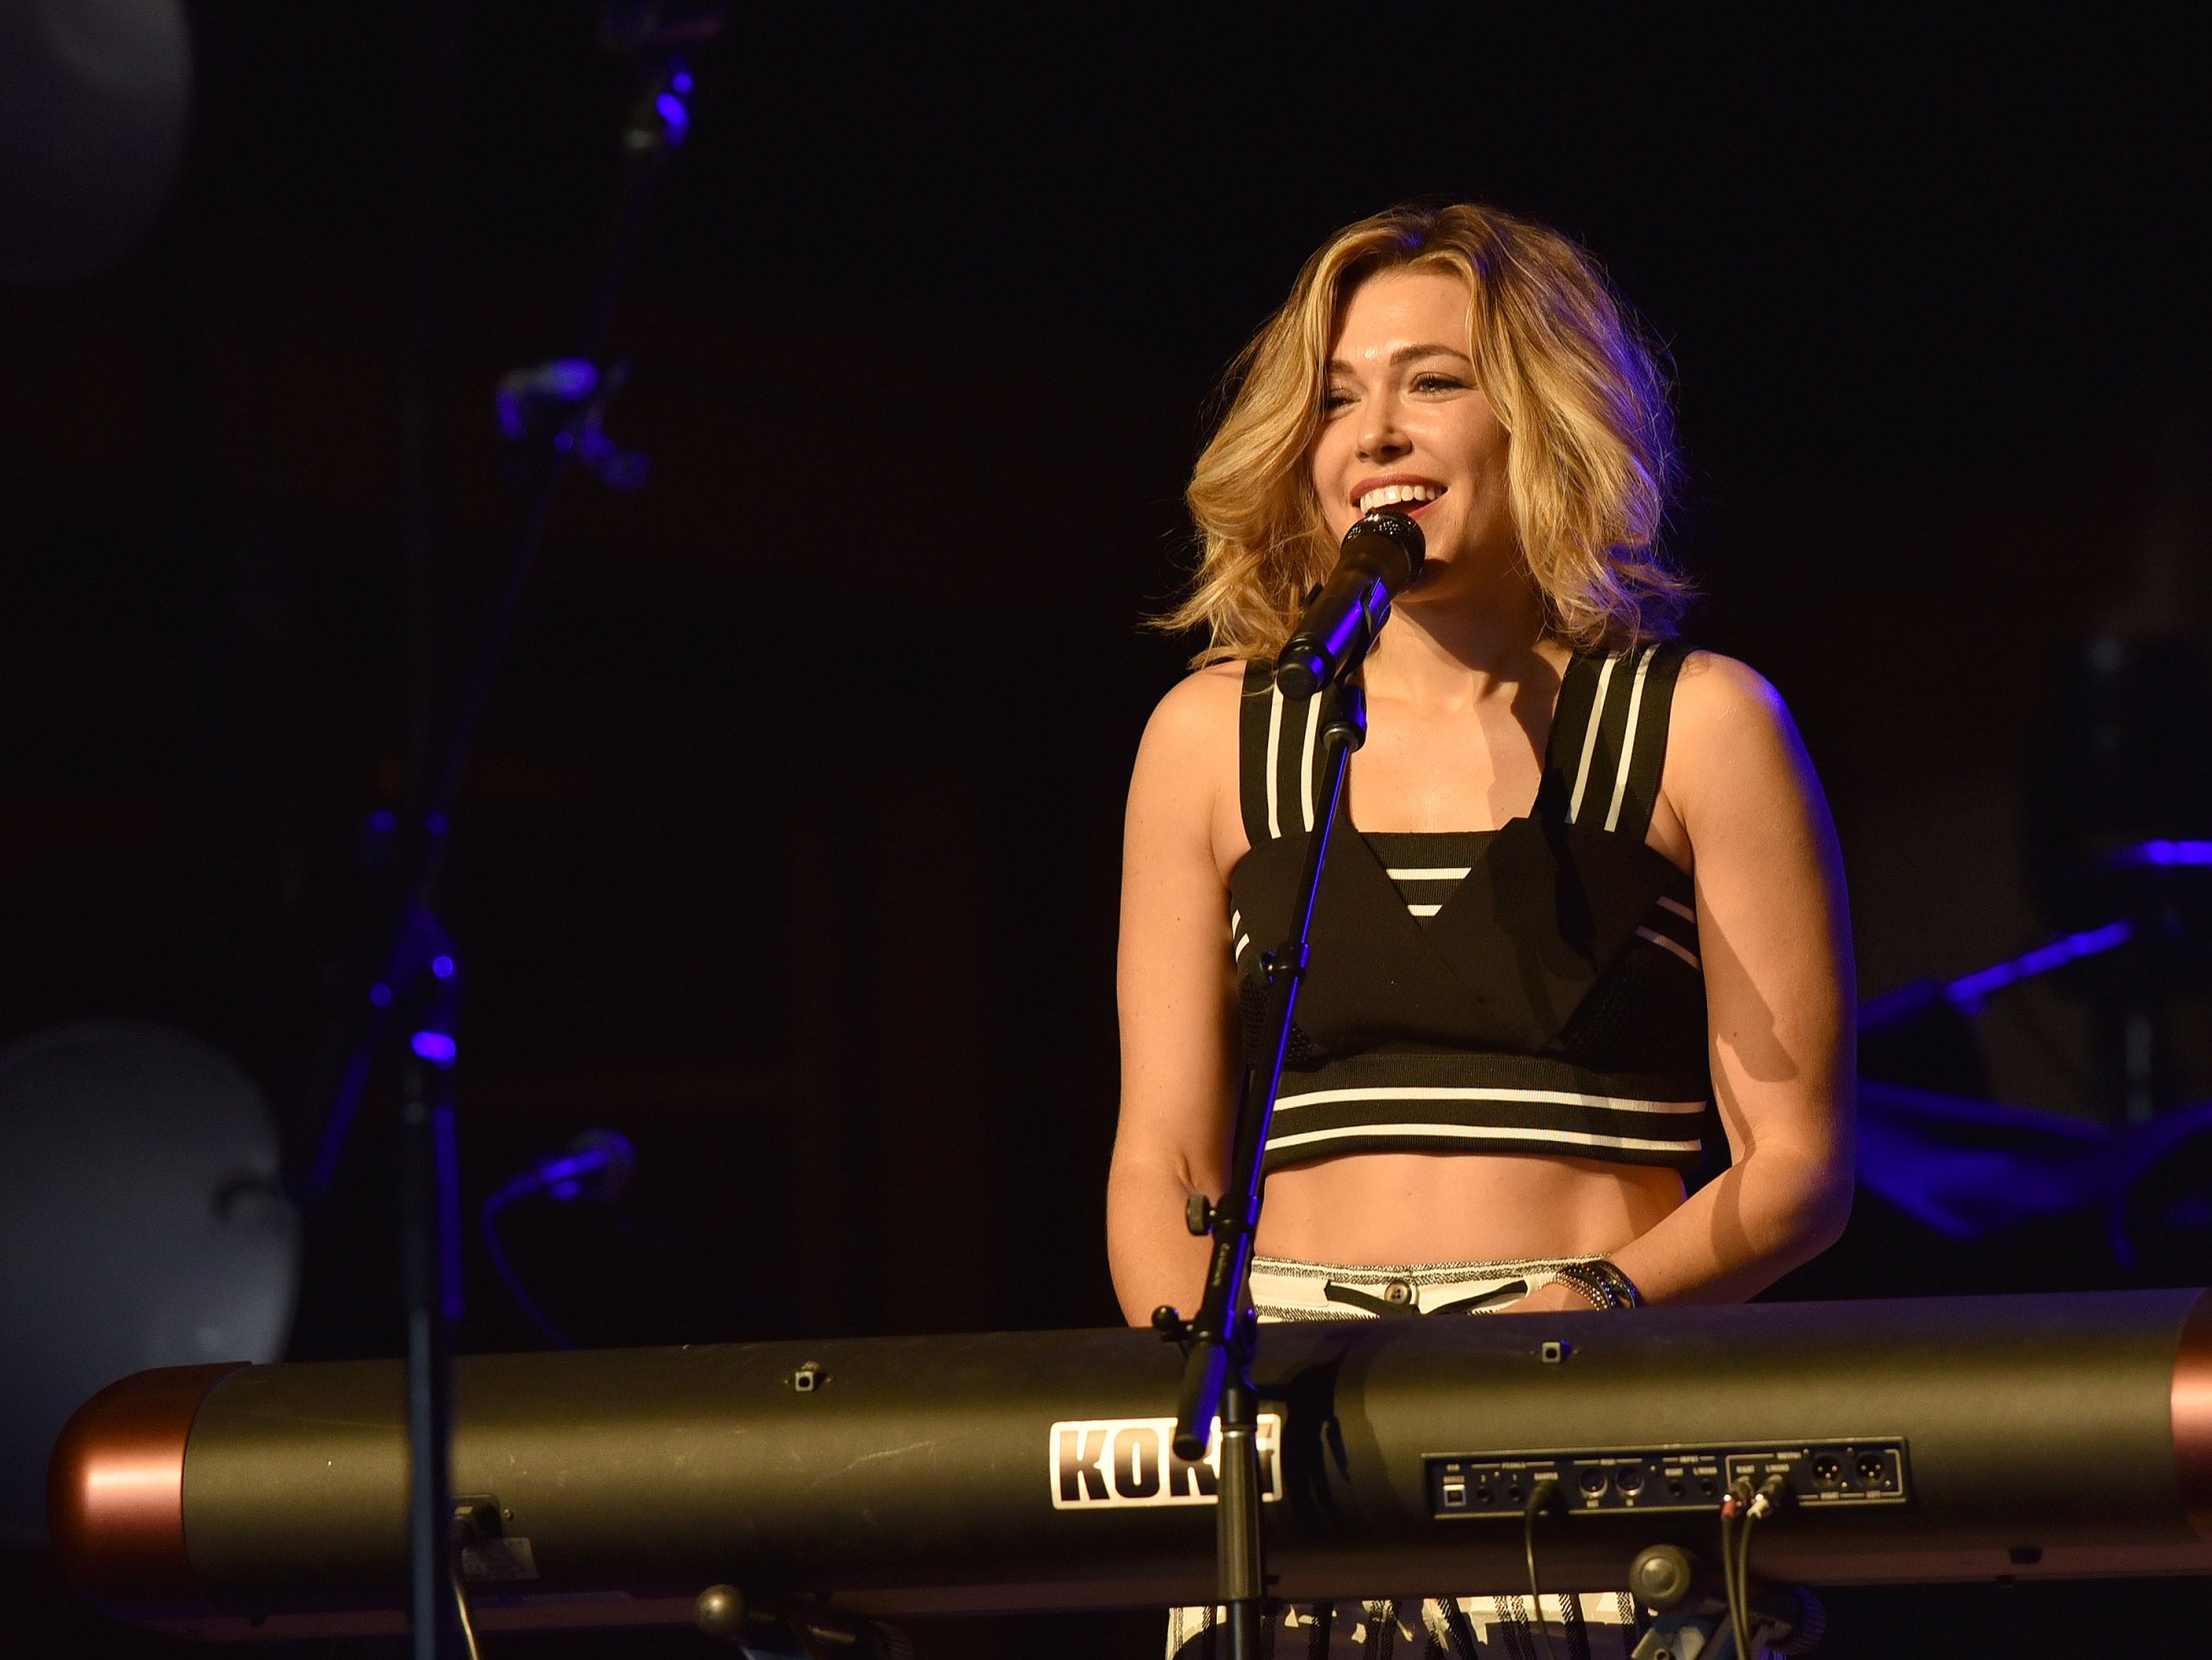 Rachel Platten performs during the 'Girls Night Out, Boys Can Come Too Tour' in Rohnert Park, Calif. on Aug. 23, 2015.